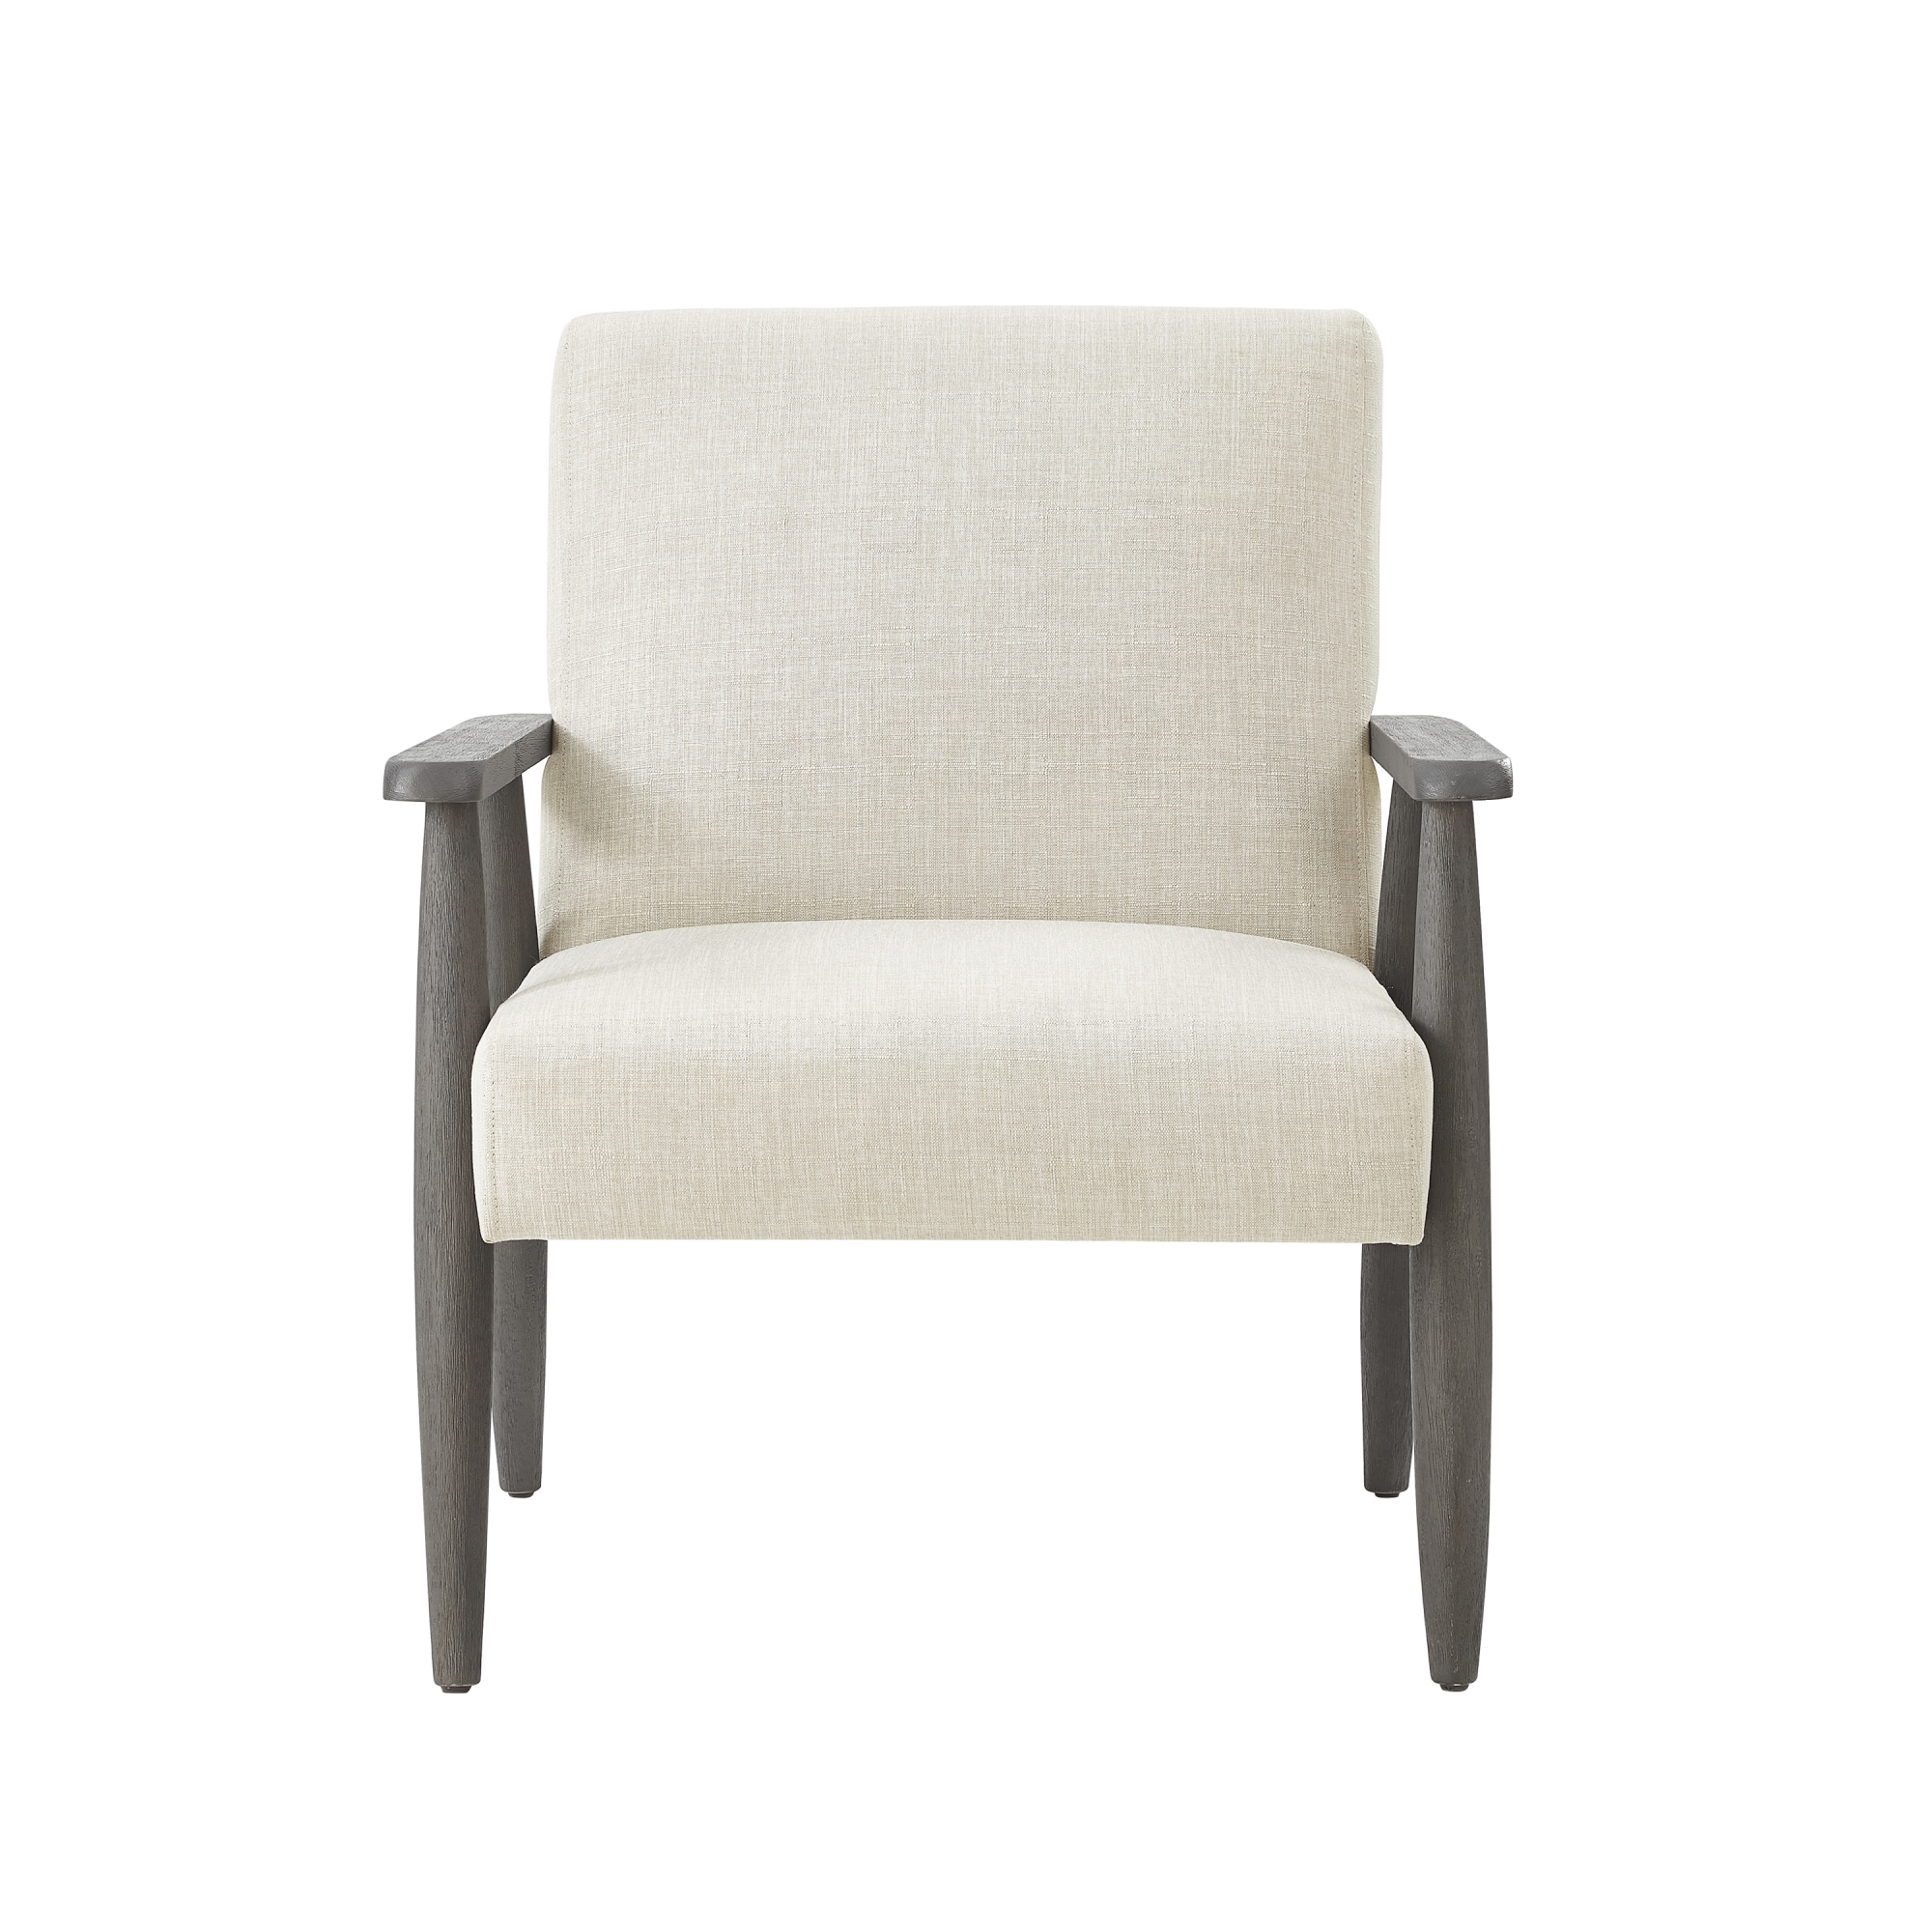 Rustic Manor Elana Armchair Upholstered Square Arms Sinuous Spring